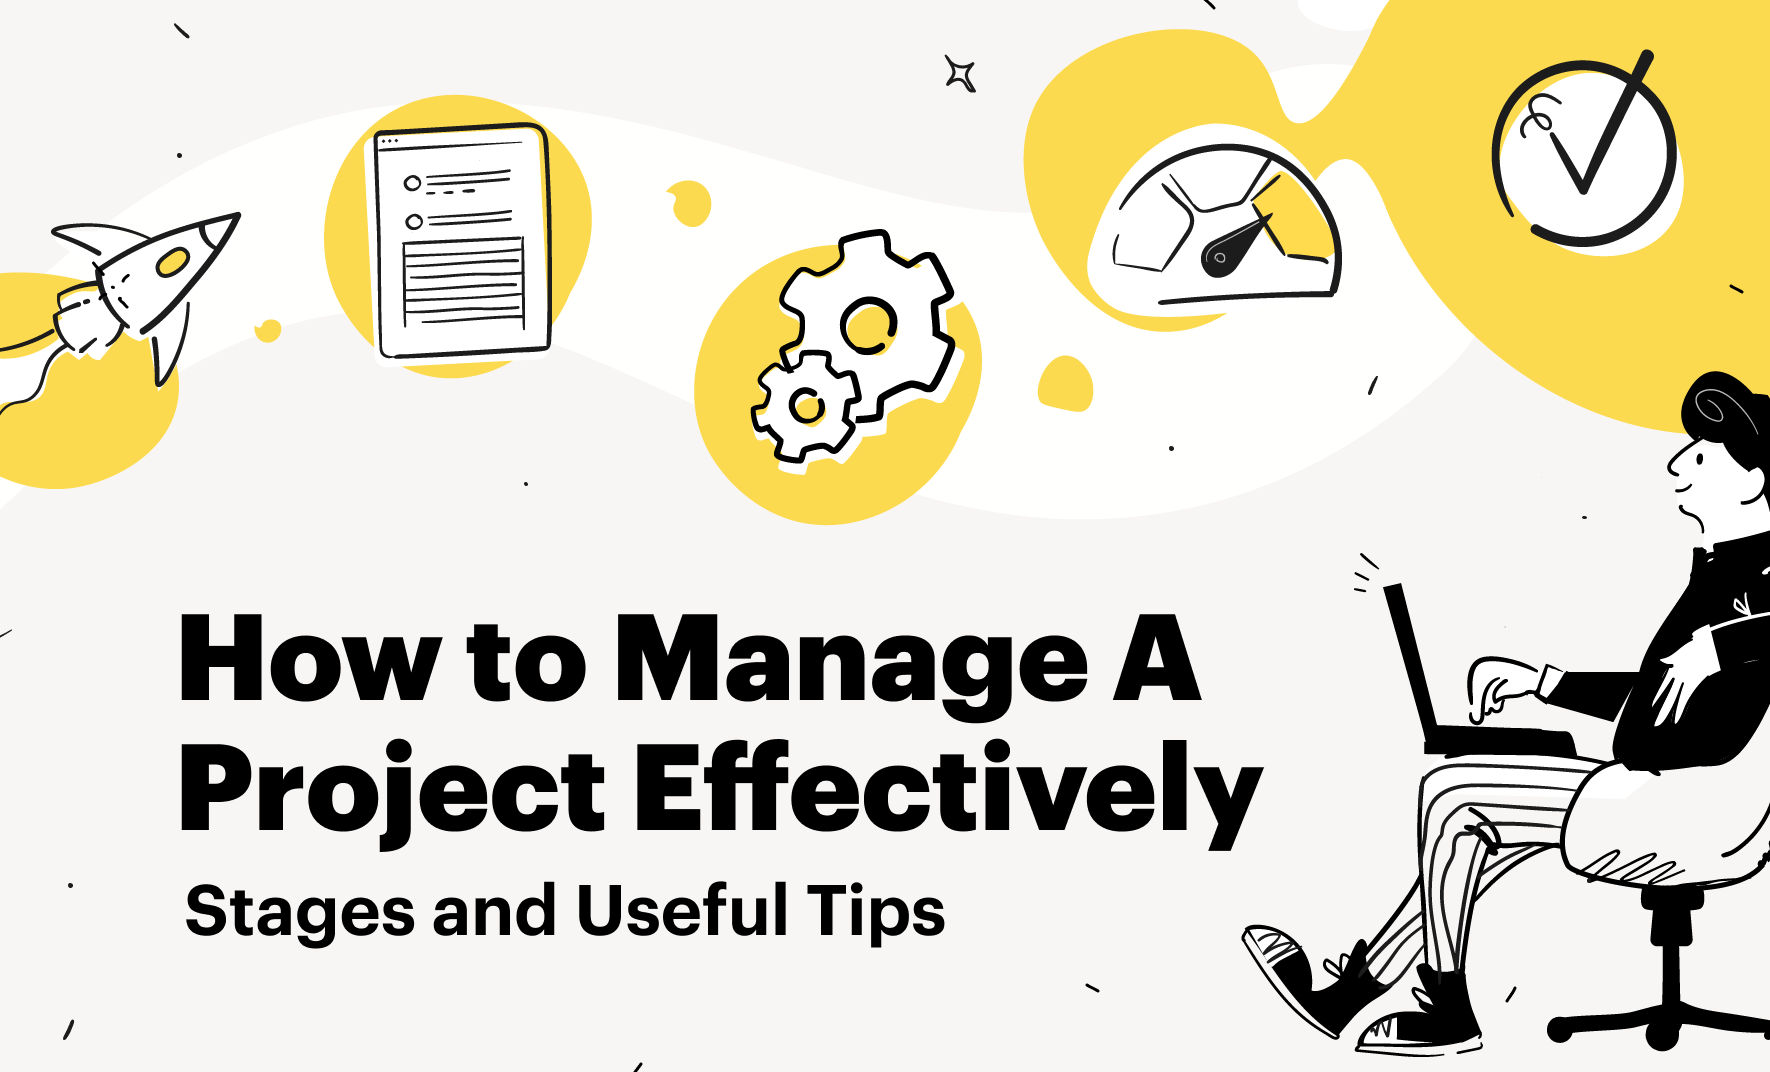 Manage a project effectively